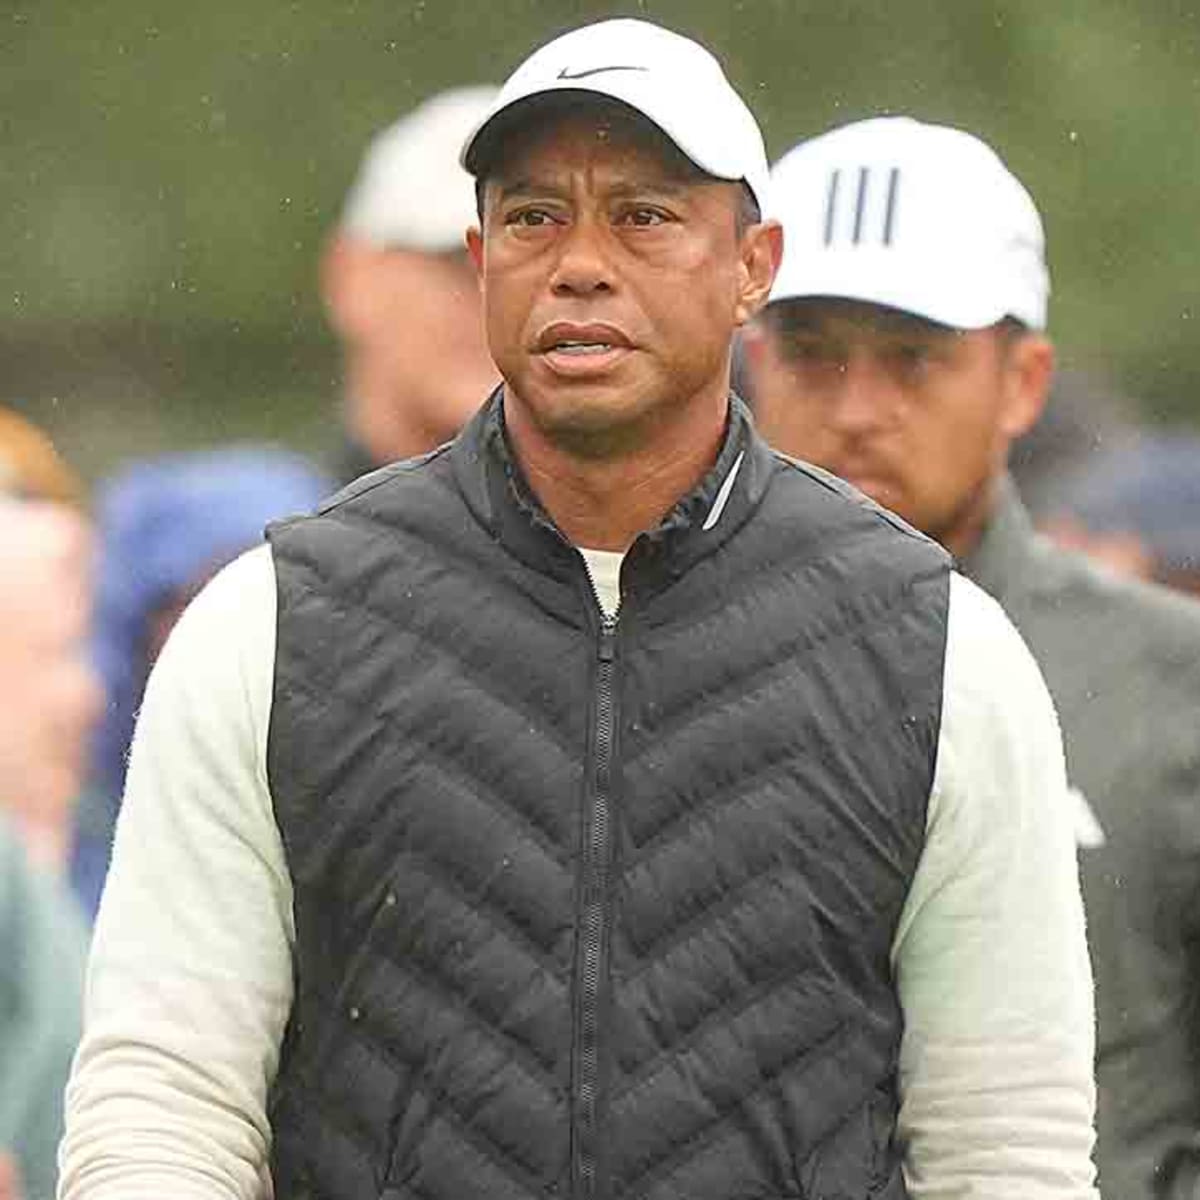 Tiger Woods Has Goal to Play in 2023 Masters Tournament: Source